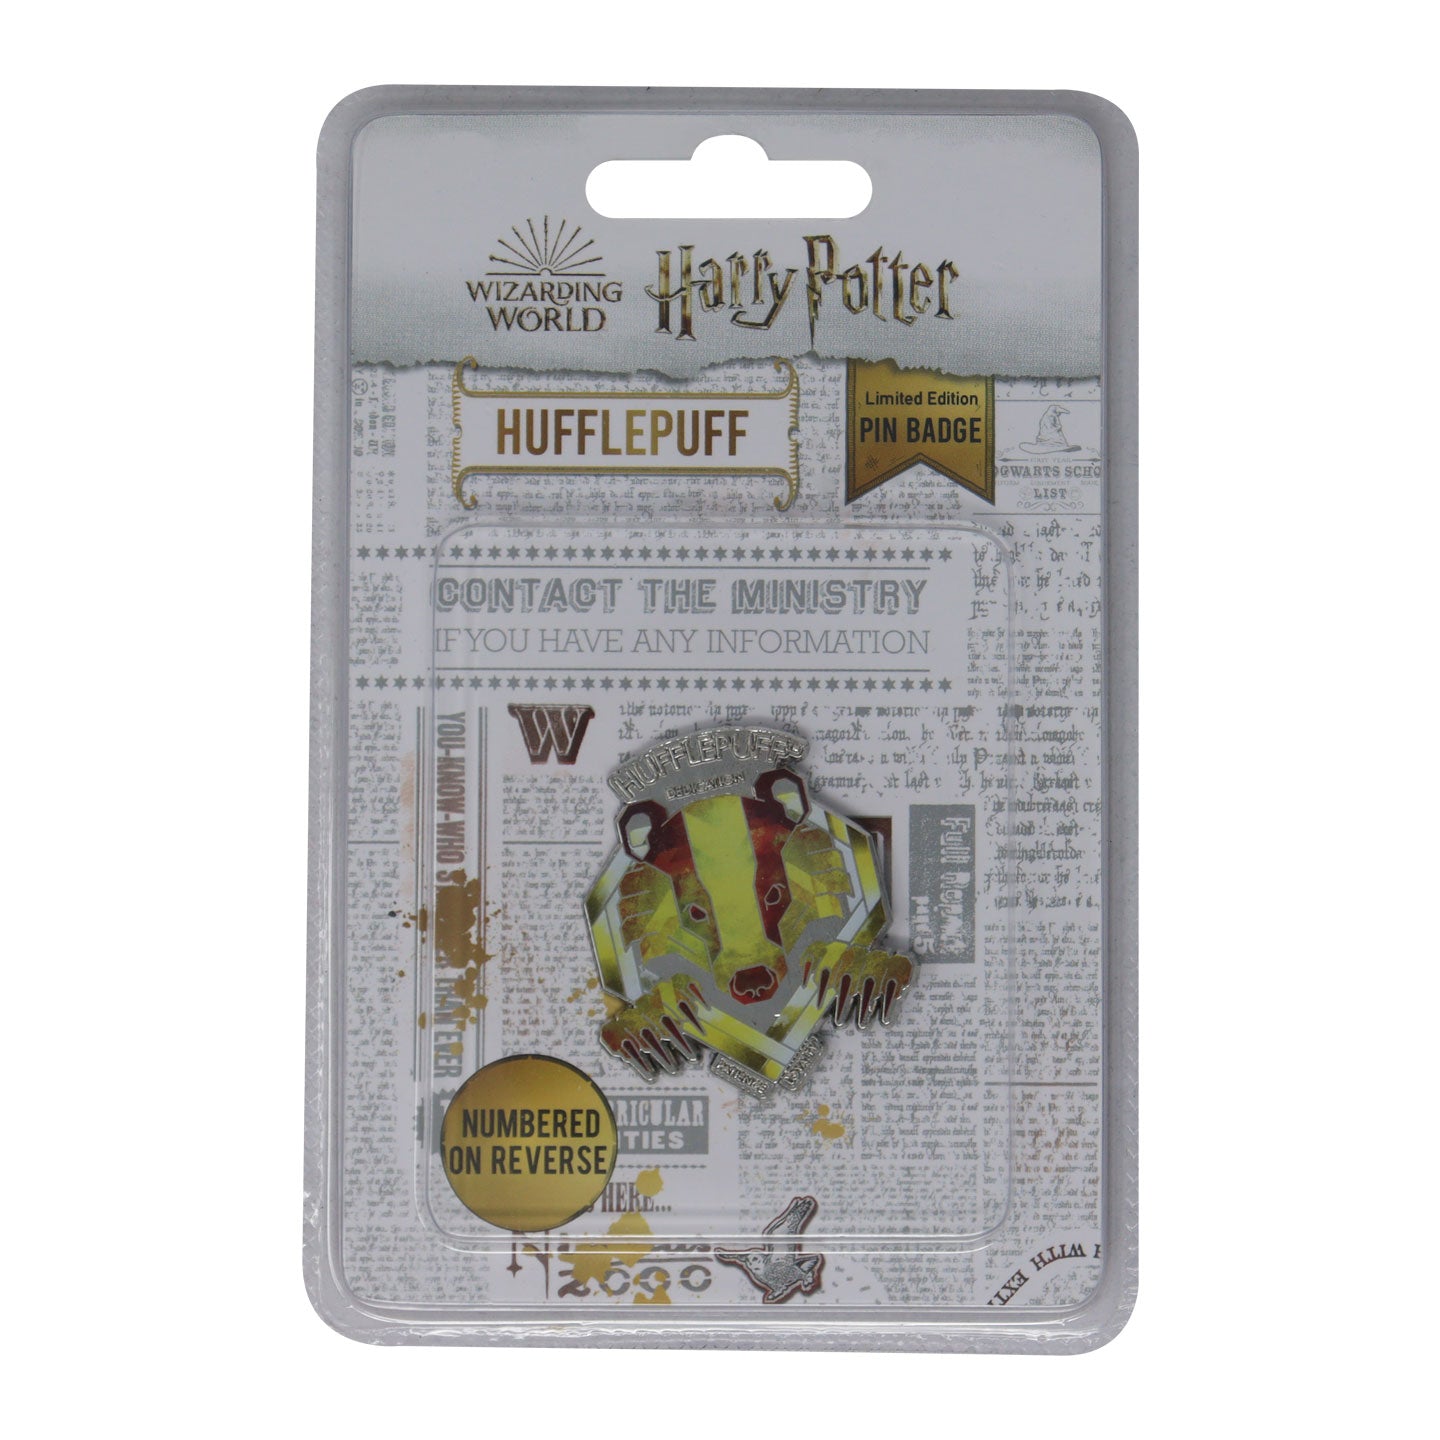 Harry Potter Limited Edition Hufflepuff House Pin Badge